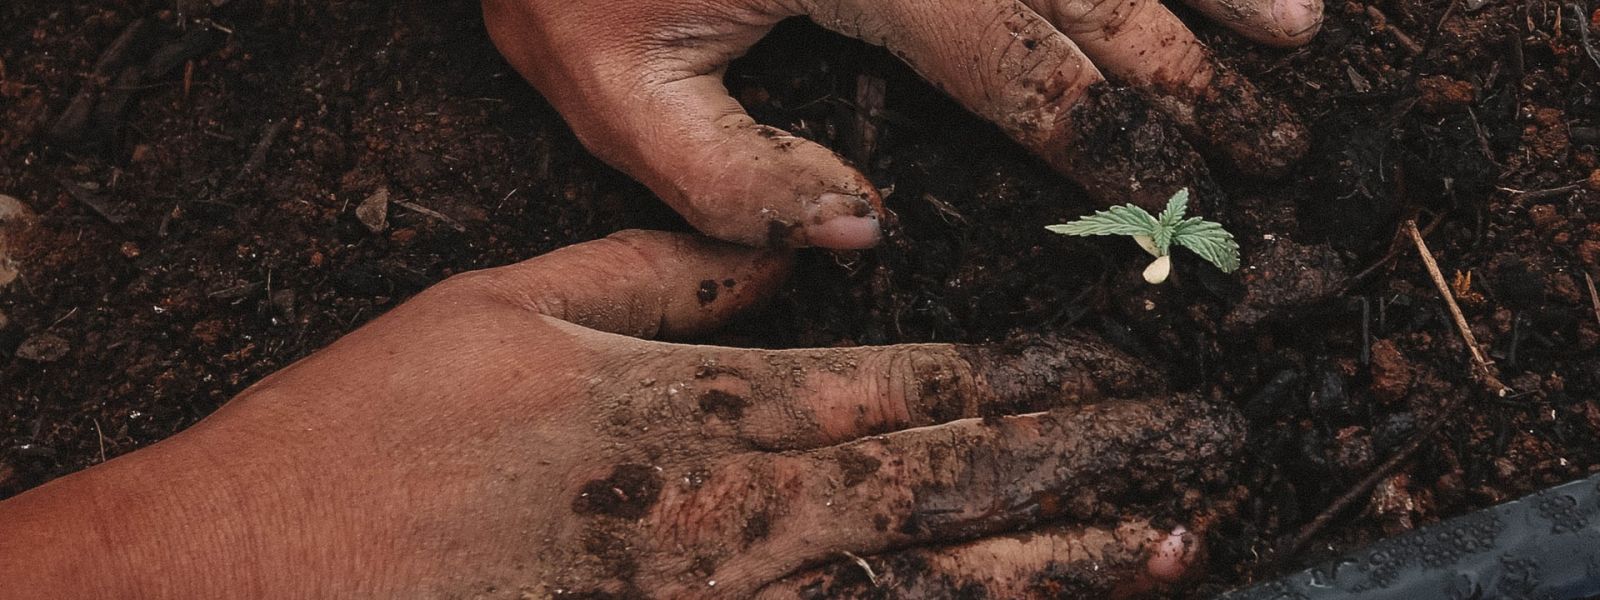 Bird's eye view of someone's hands covered in dirt as they plant a seedling.